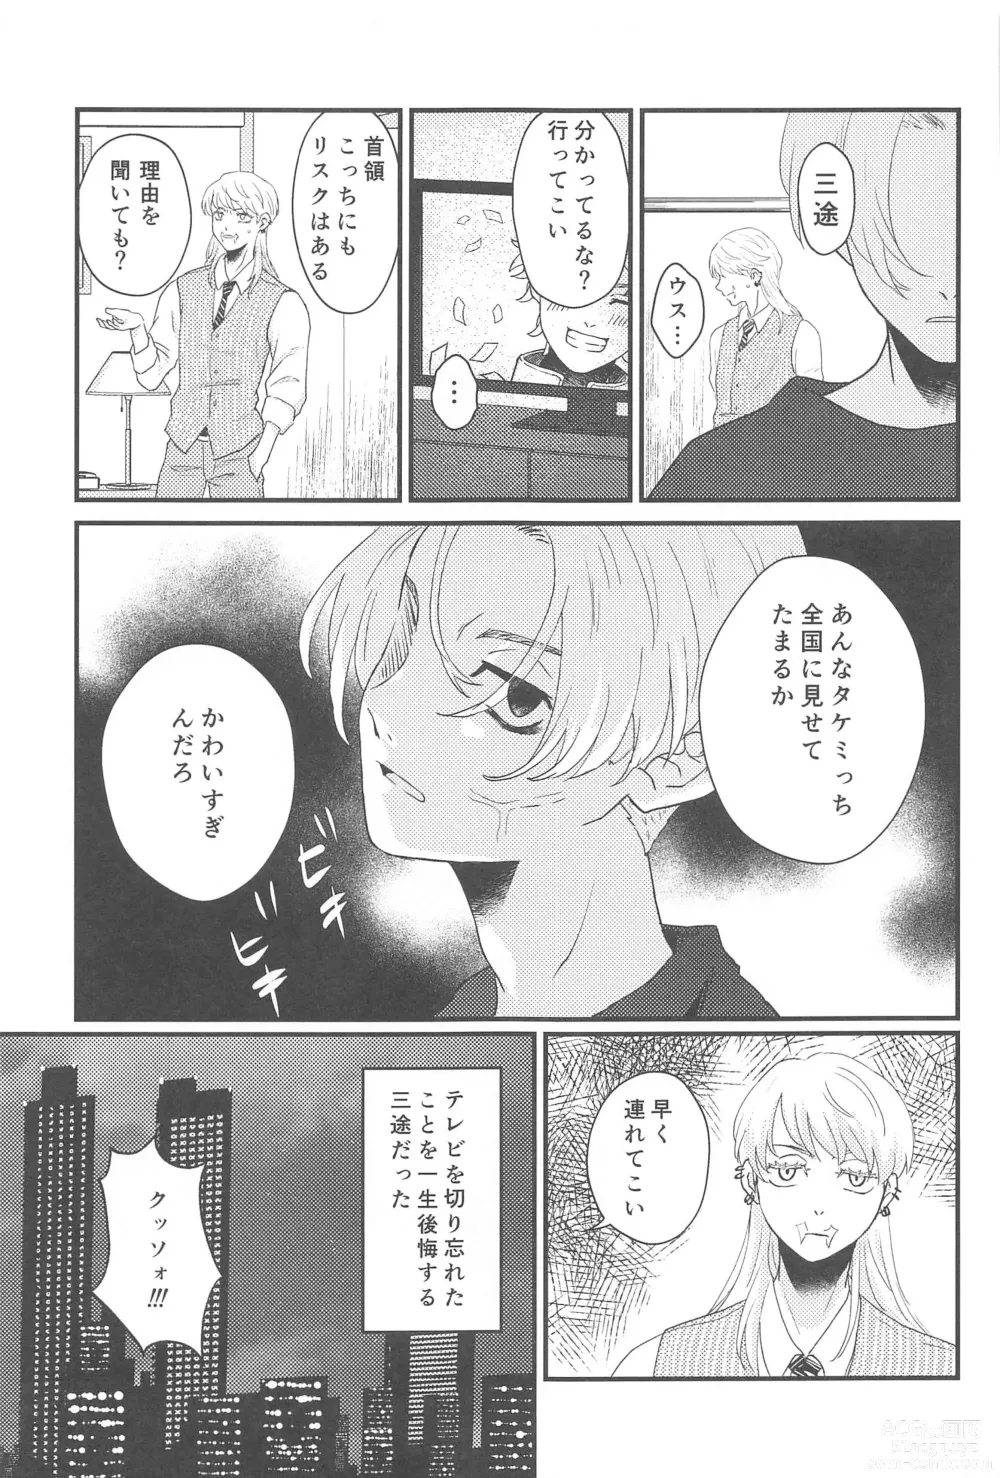 Page 6 of doujinshi STAY LUCKY